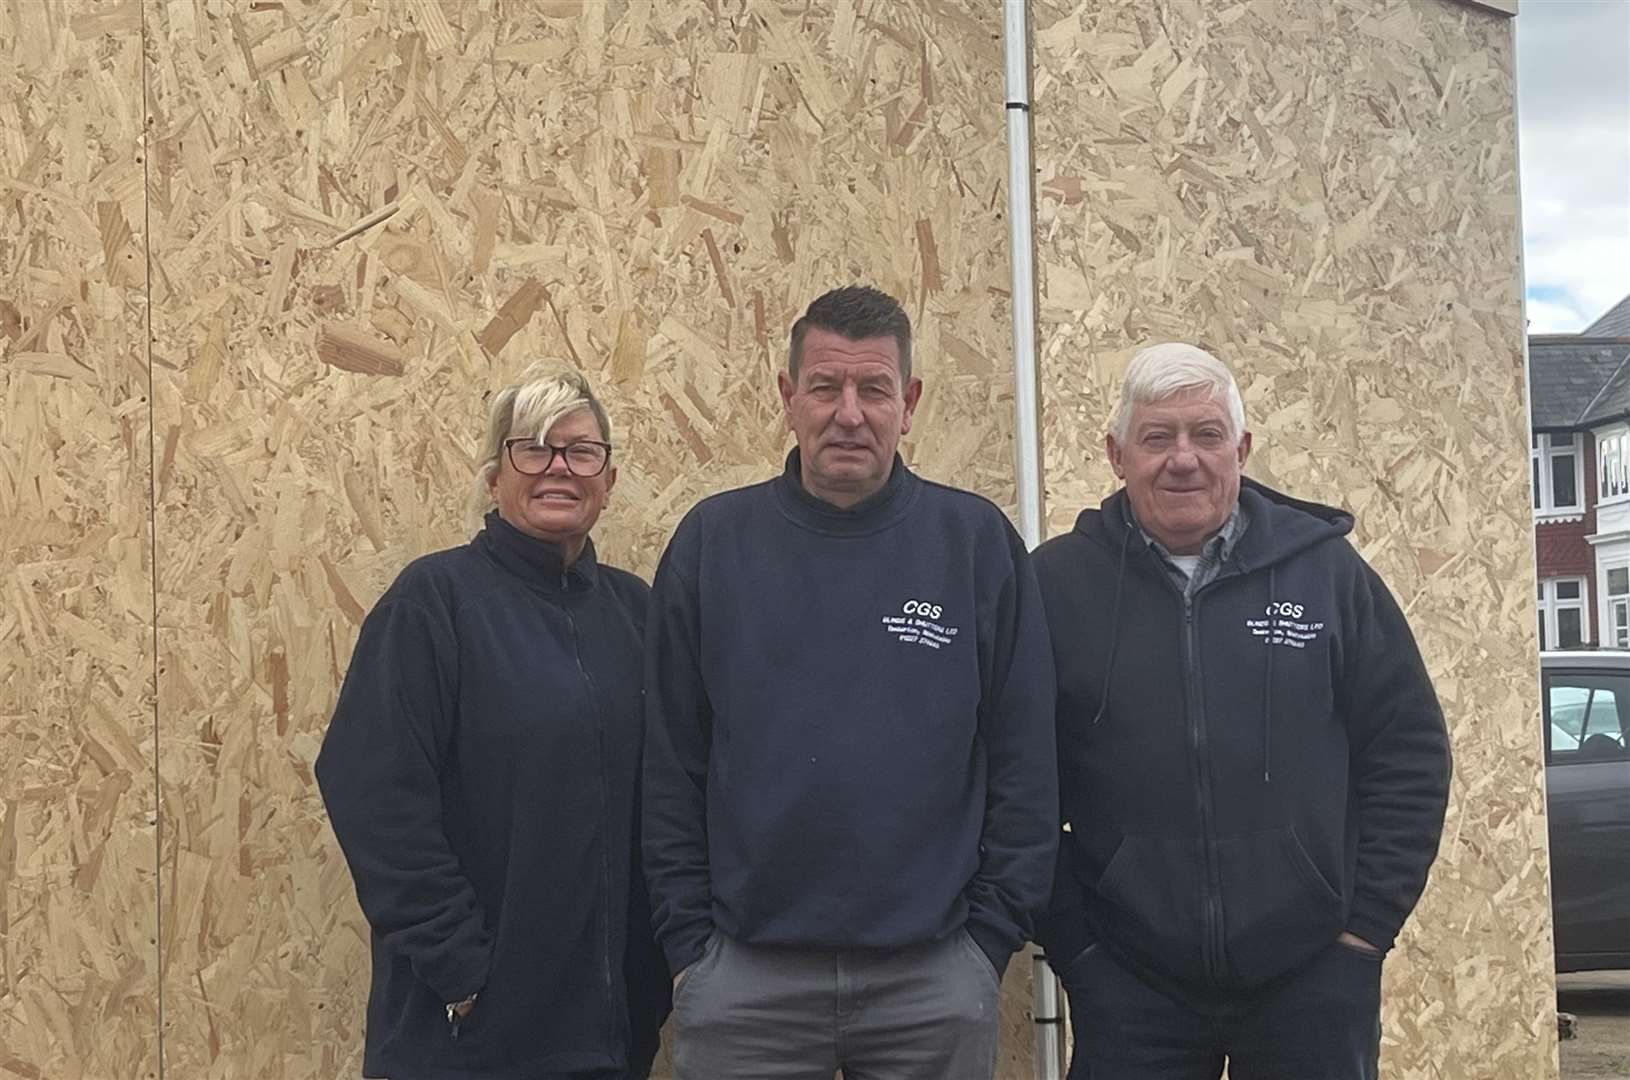 Julie, Gary and Chris Shone were able to reopen CGS Blinds & Shutters in Tankerton on Tuesday morning after the shop front was boarded up